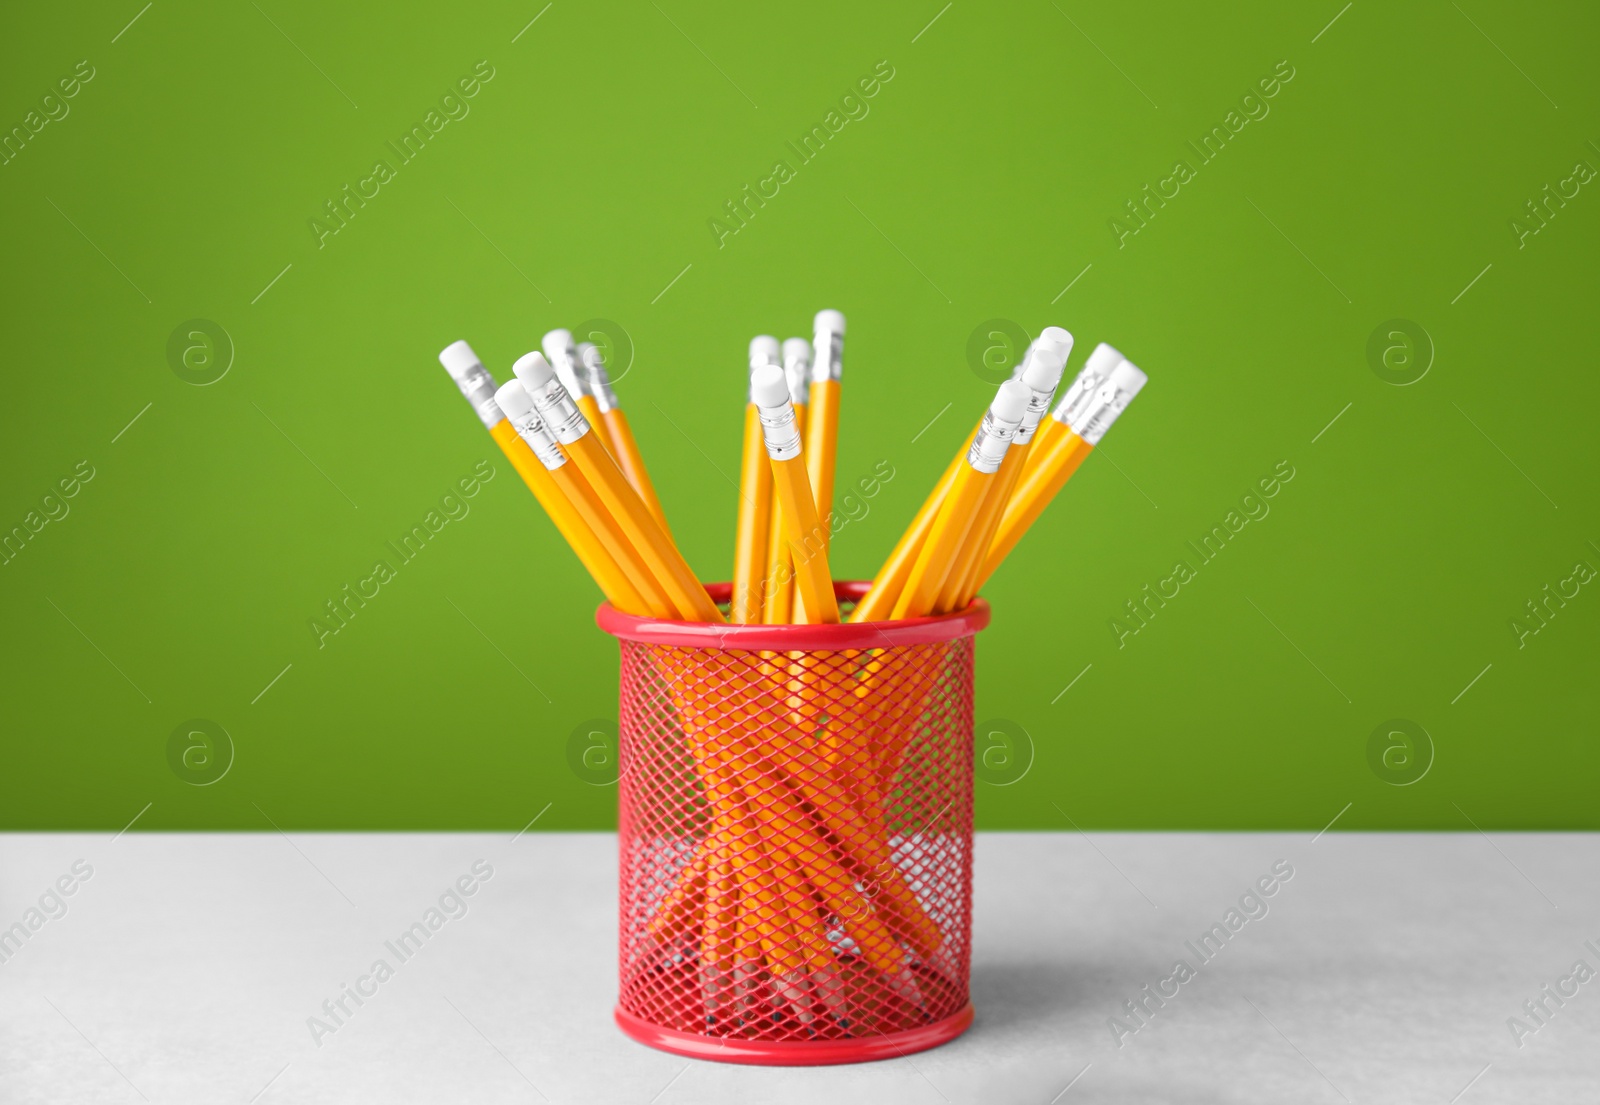 Photo of Many sharp pencils in holder on light table against green background